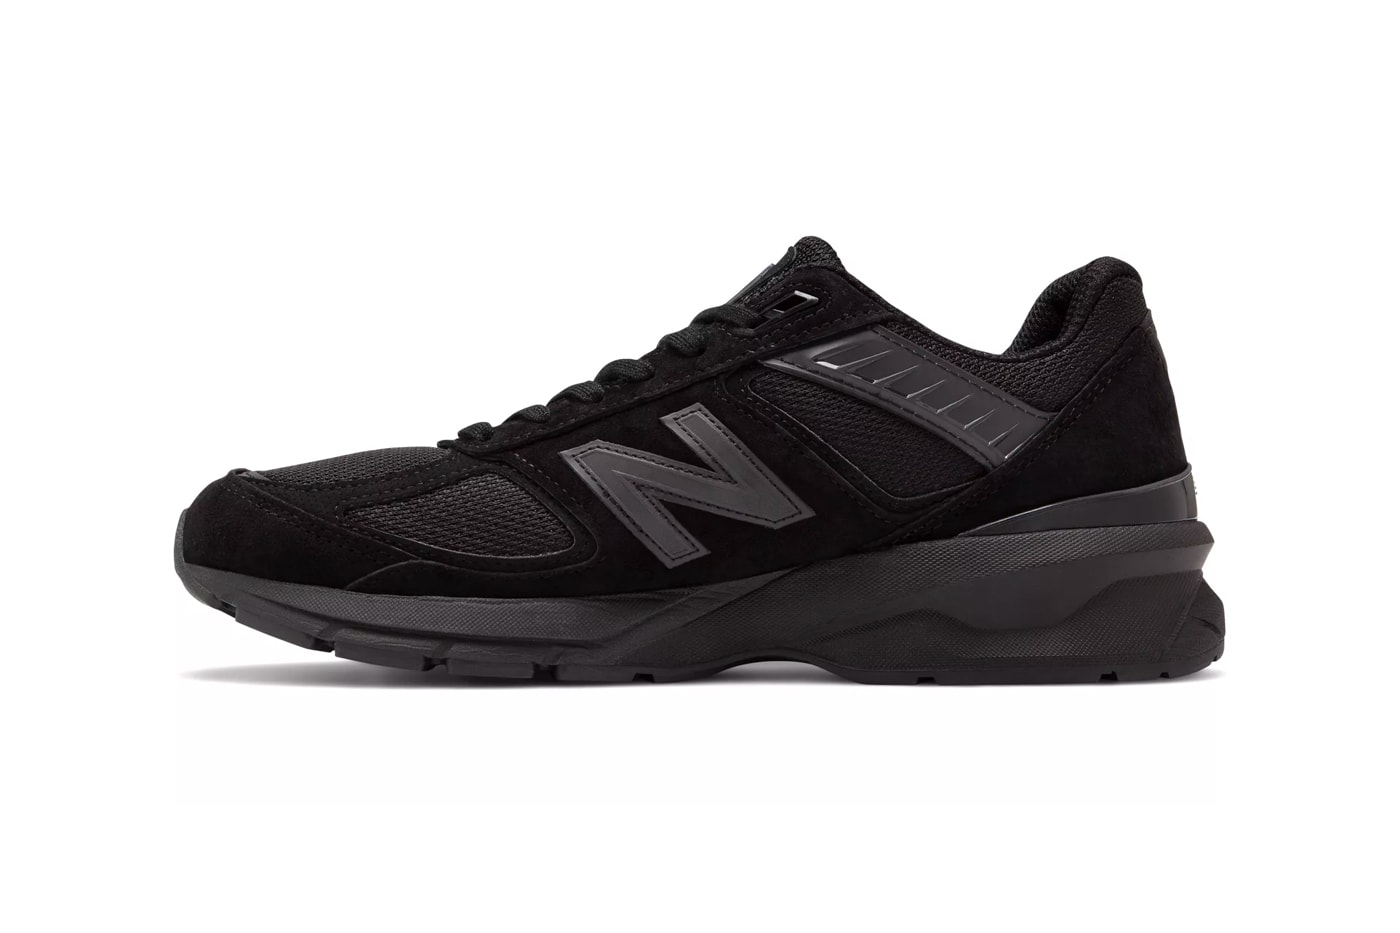 New Balance Made in USA 990v5 Black Encap midsole ortholite cushion technology hand crafted 75 years factory maine footwear sneakers suede mesh rubber